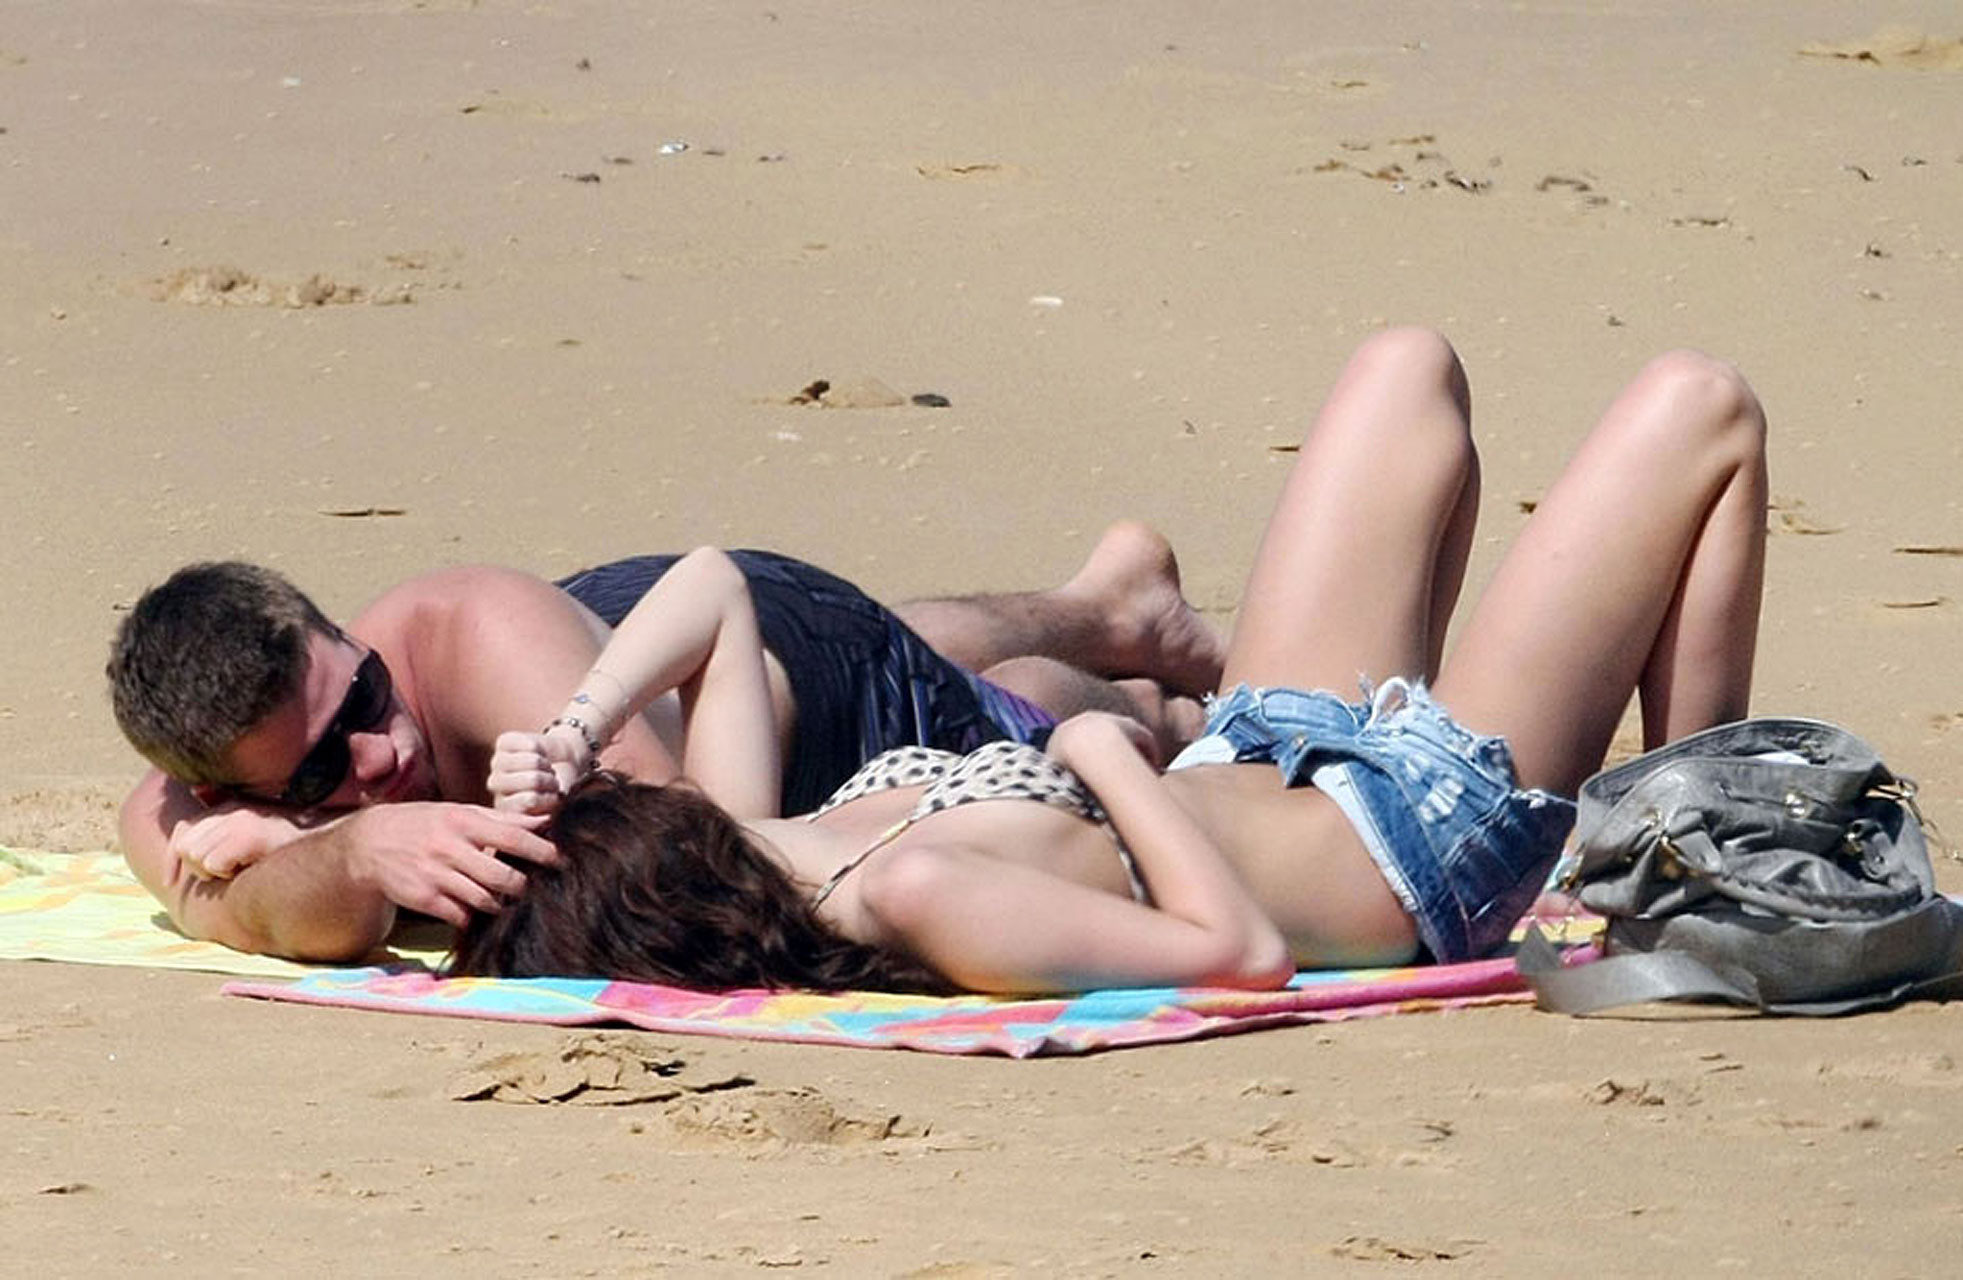 Miley Cyrus making love with her boyfriend on beach very sexy photos #75360184